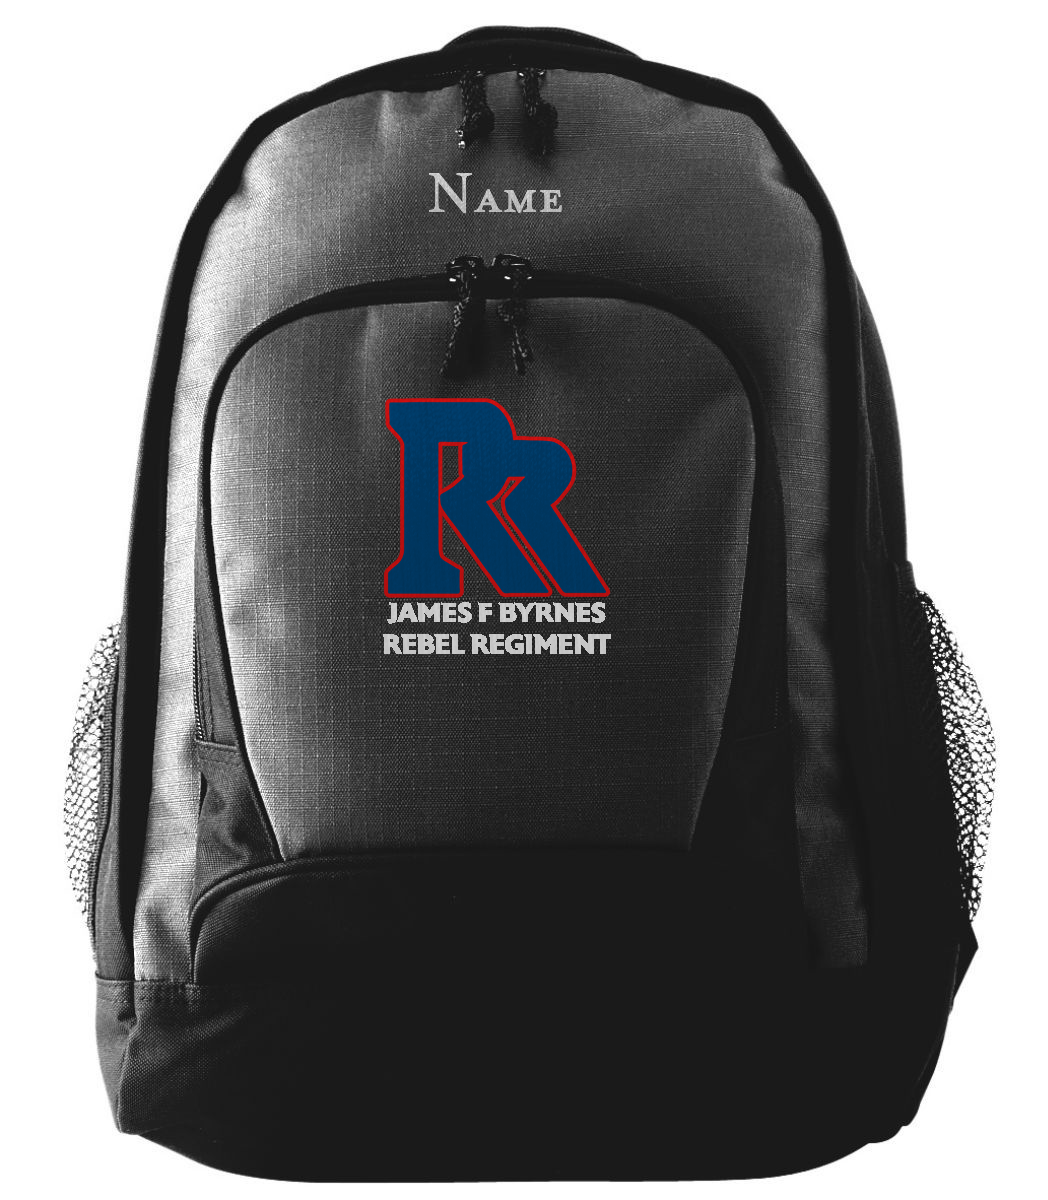 Byrnes Band Ripstop Backpack w/ Name & Logo Embroidery